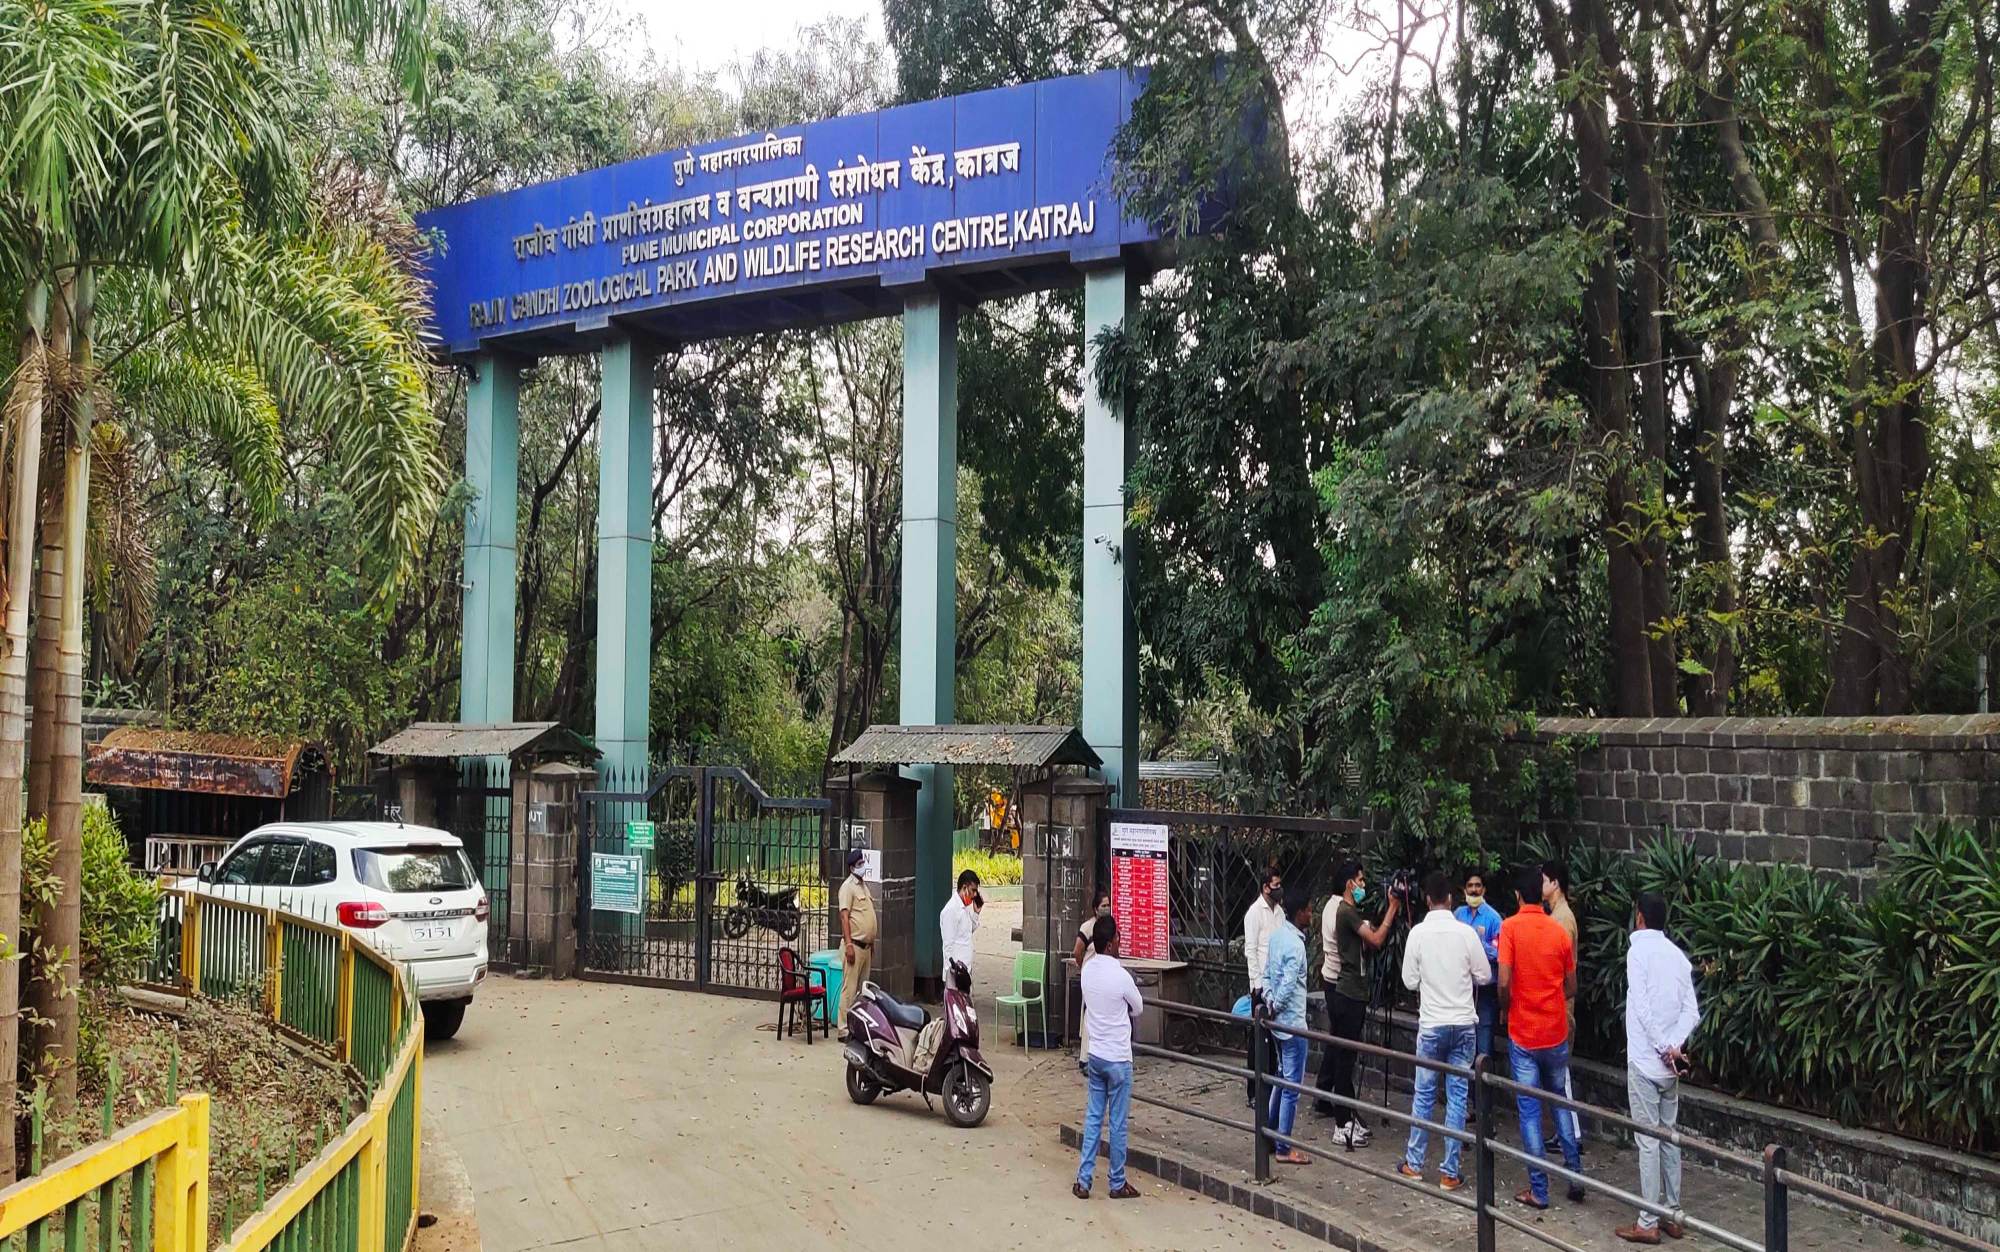 Rajiv Gandhi Zoological Park and Wildlife Research Centre